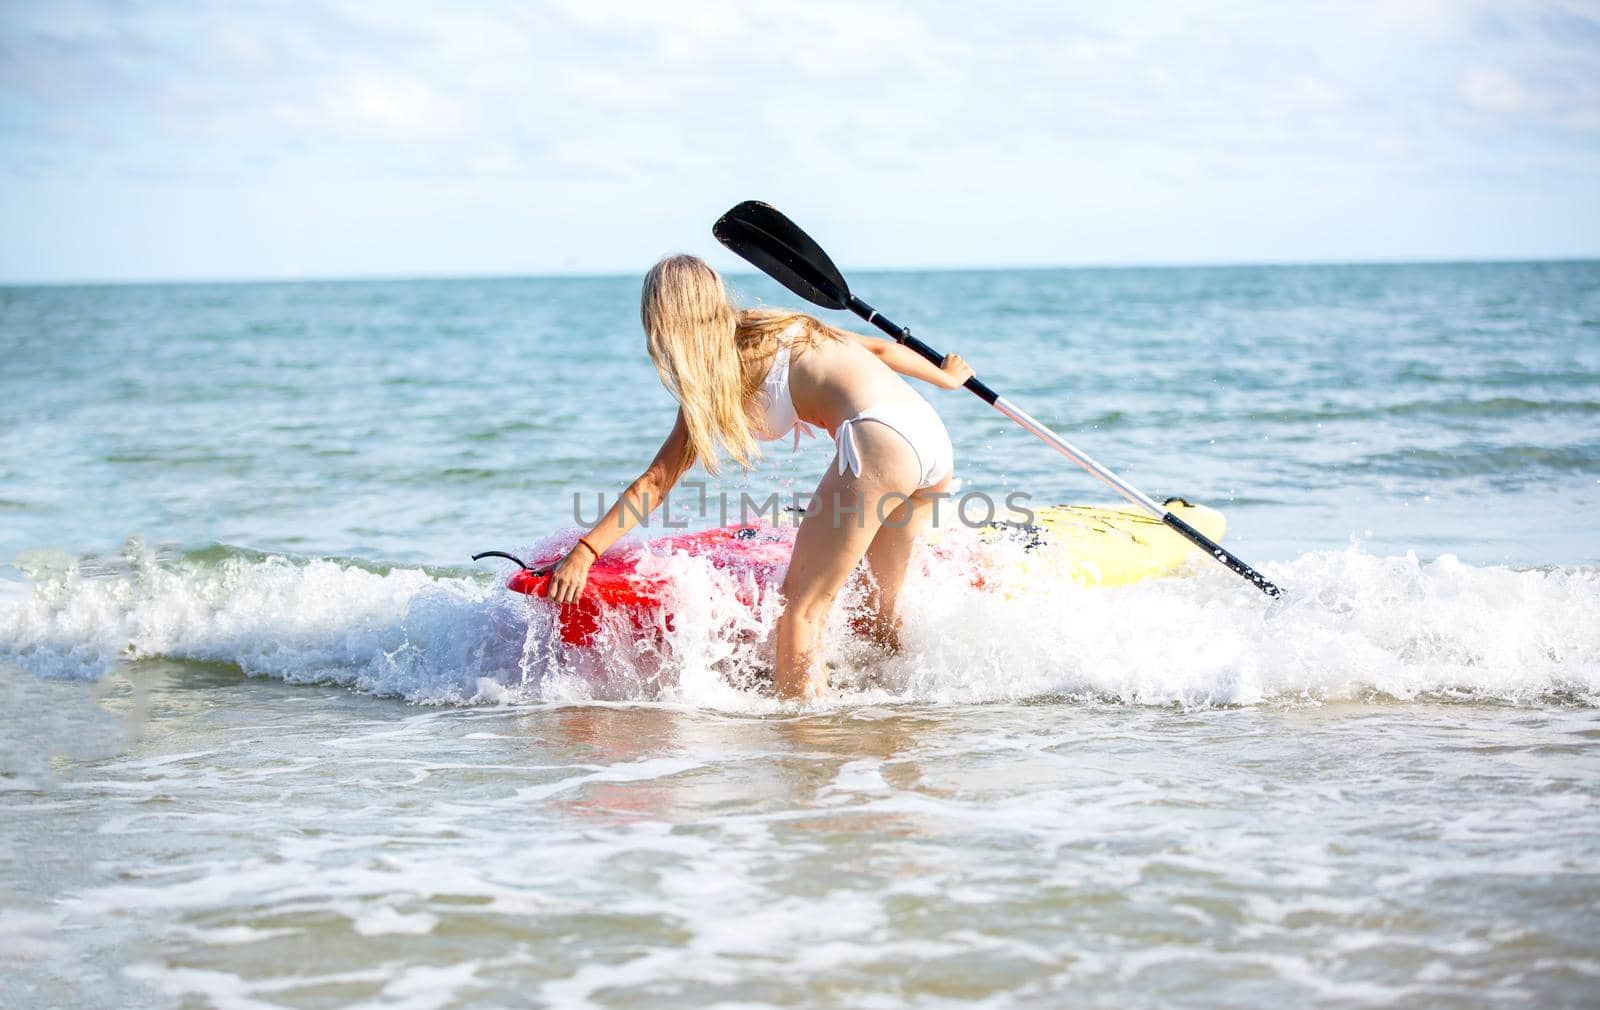 Woman on stand up paddle board. Having fun during warm summer beach vacation holiday, active woman